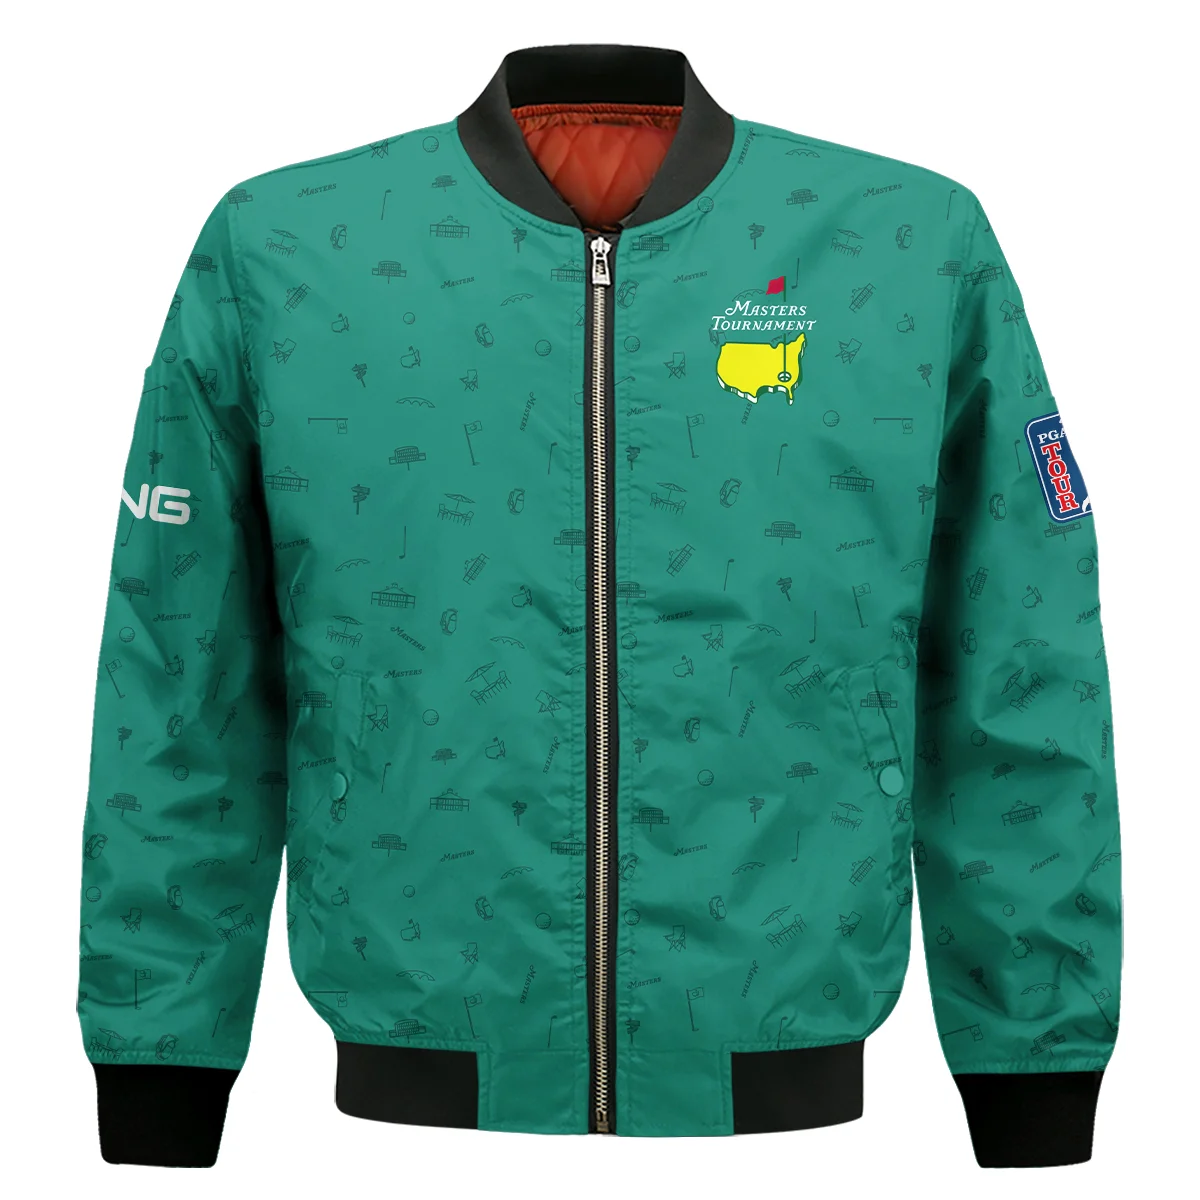 Golf Masters Tournament Ping Bomber Jacket Augusta Icons Pattern Green Golf Sports All Over Print Bomber Jacket